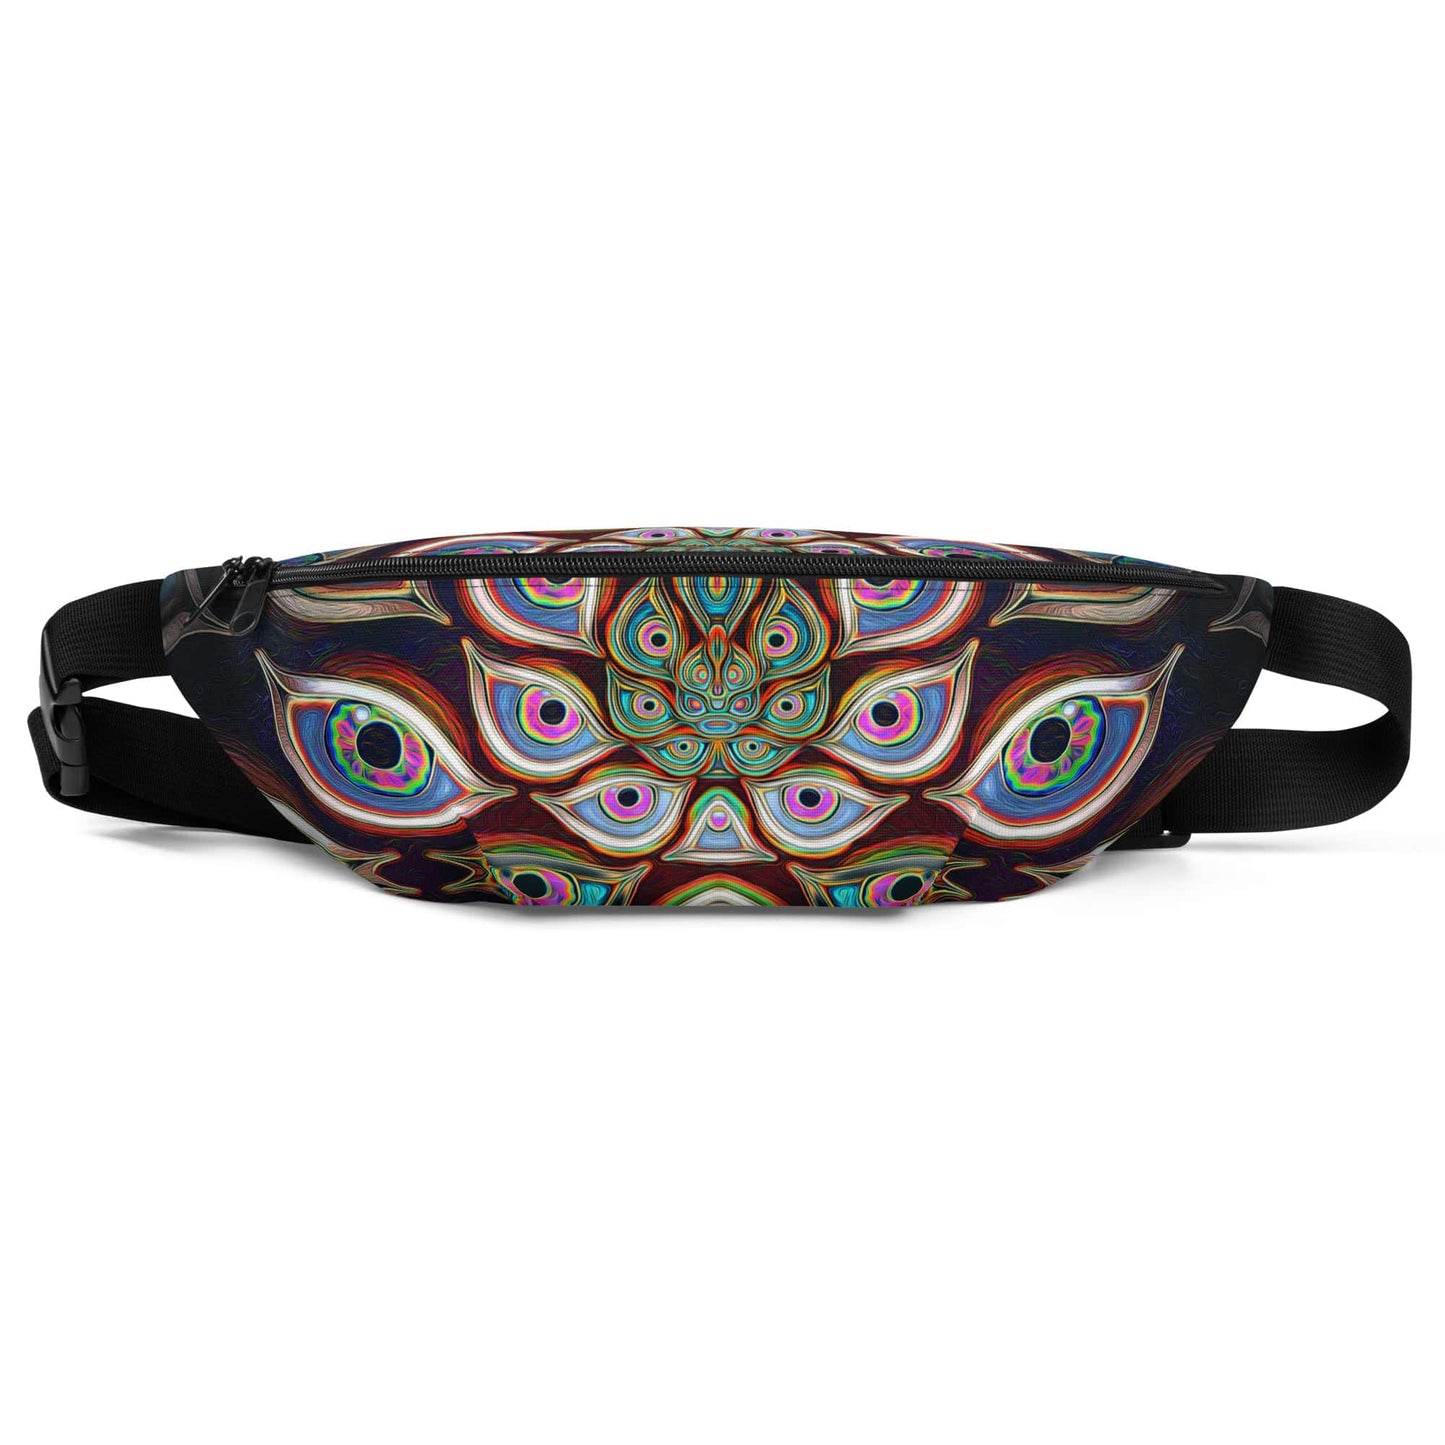 "The Waiting Room" FANNY PACK